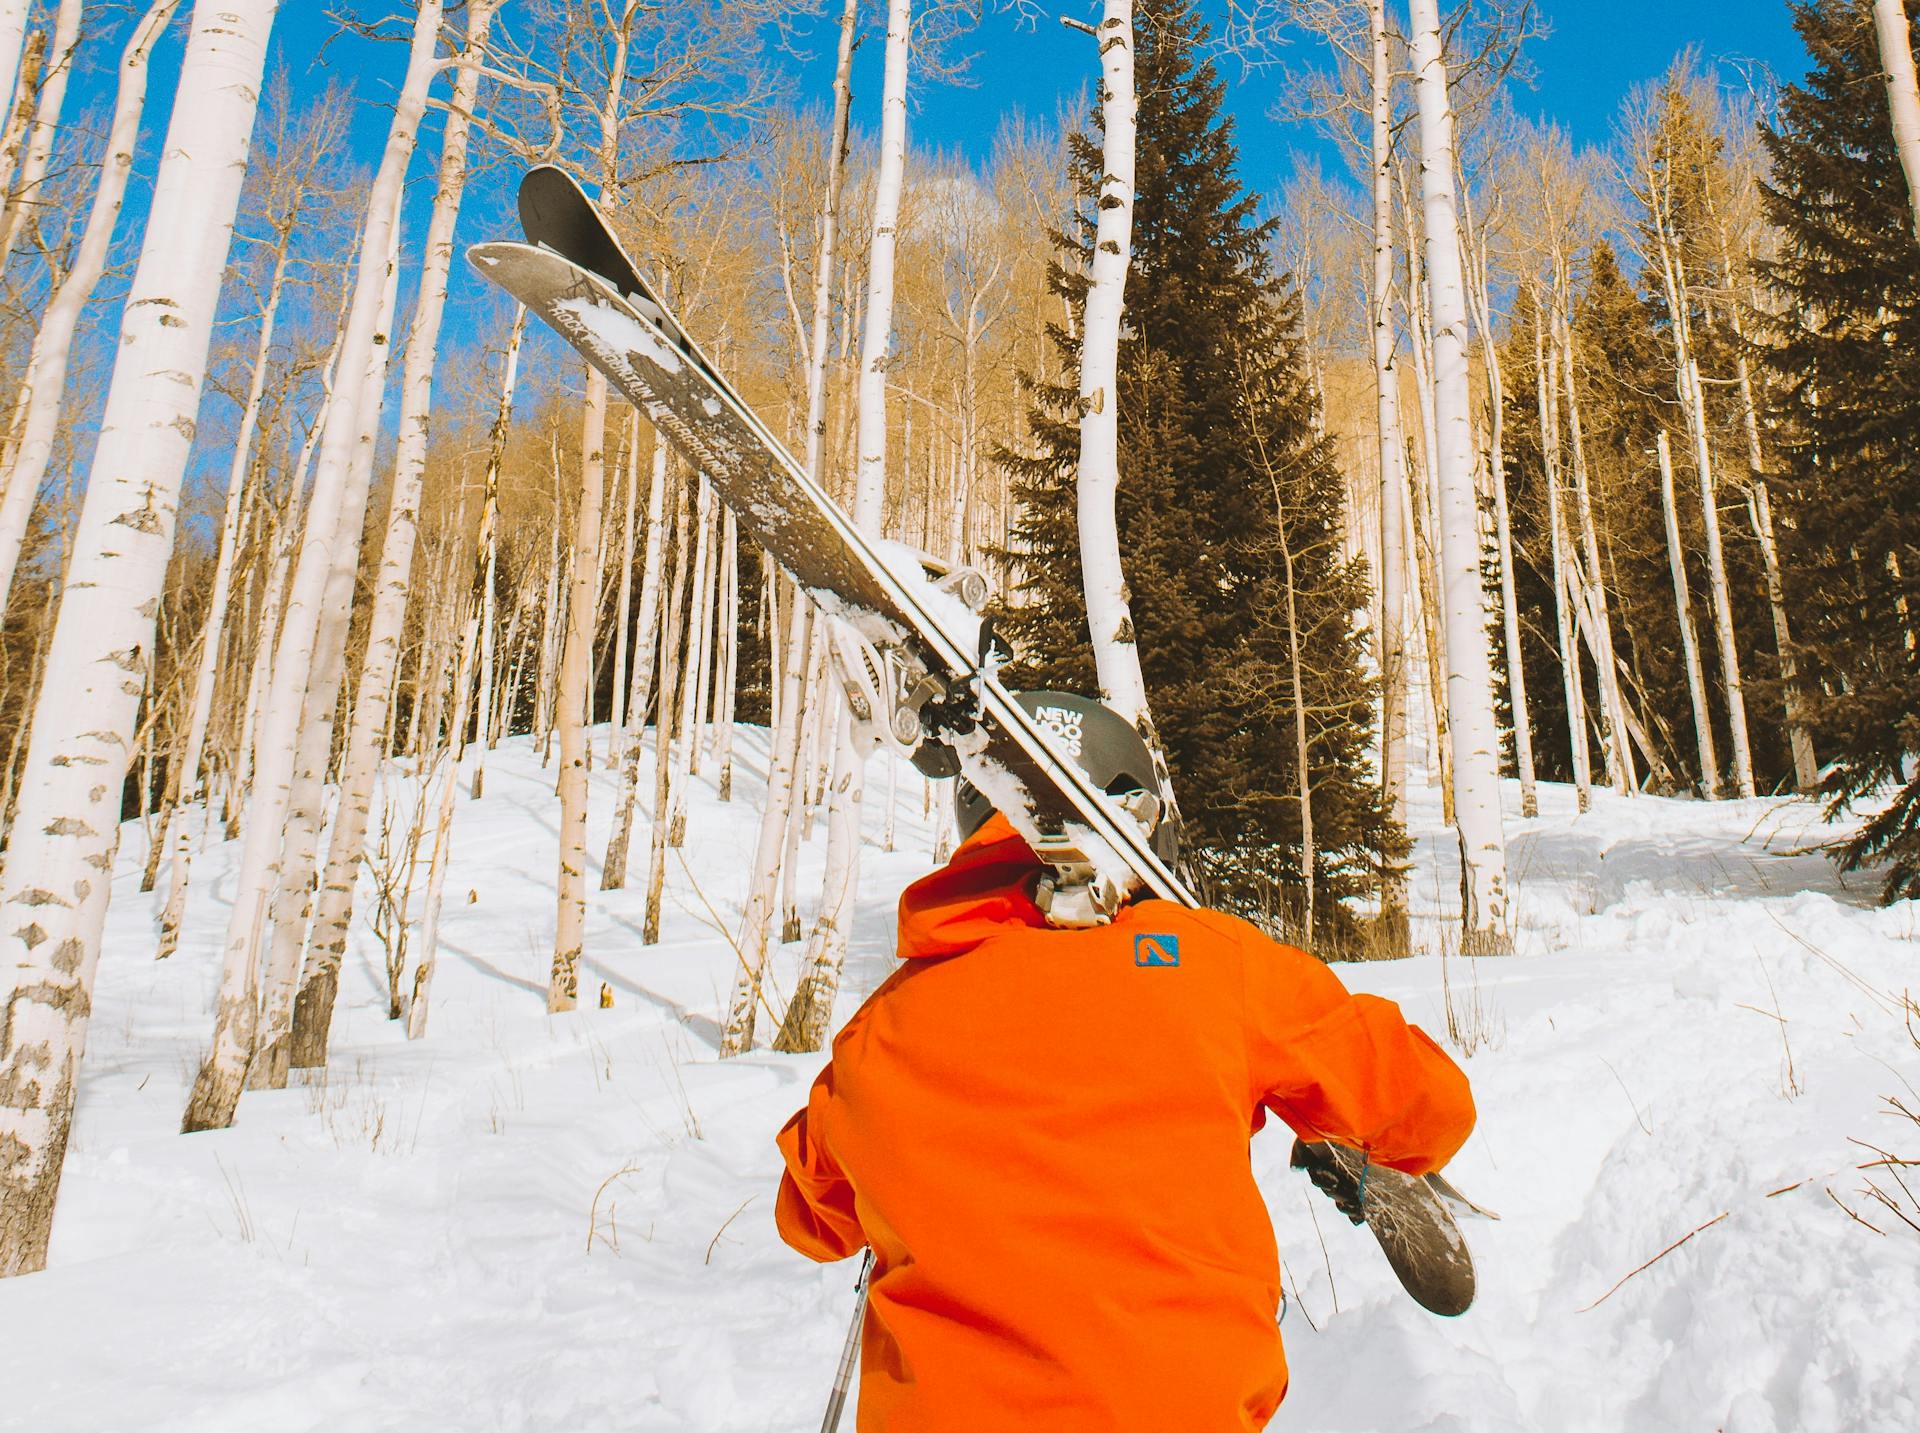 Skier walking through the backcountry carrying his skis